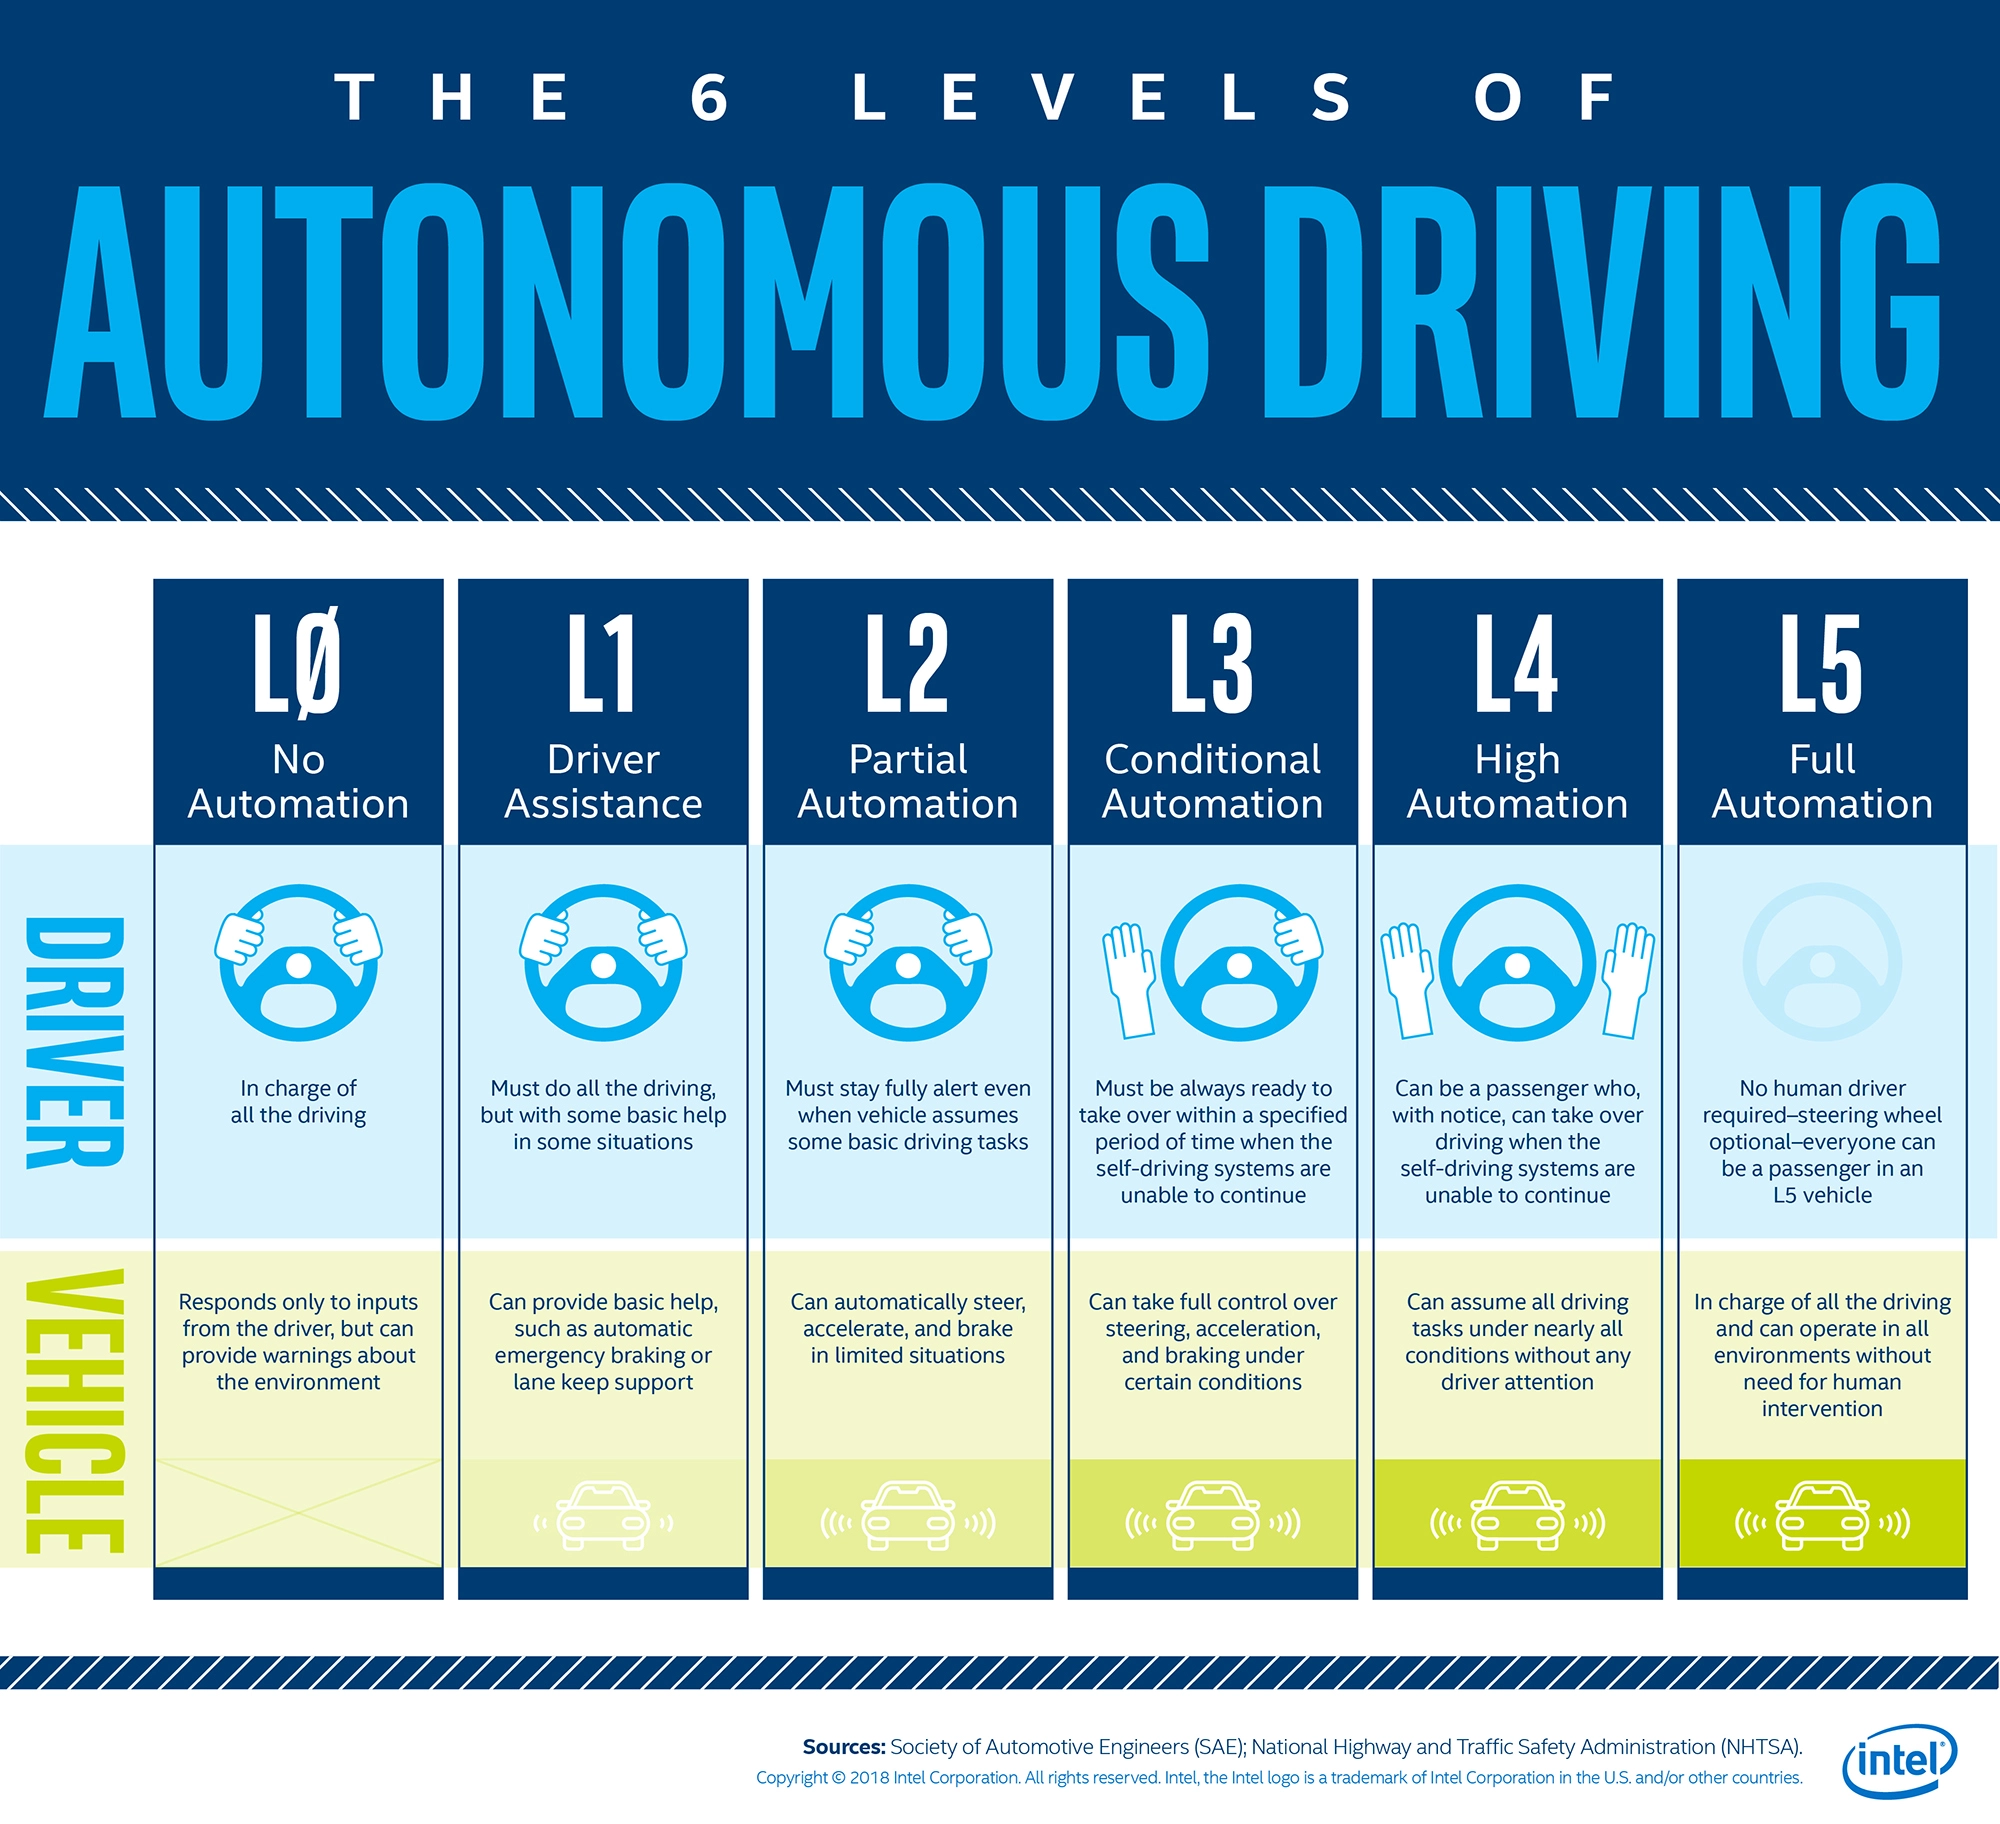 Infographic showing the various levels of driving autonomy